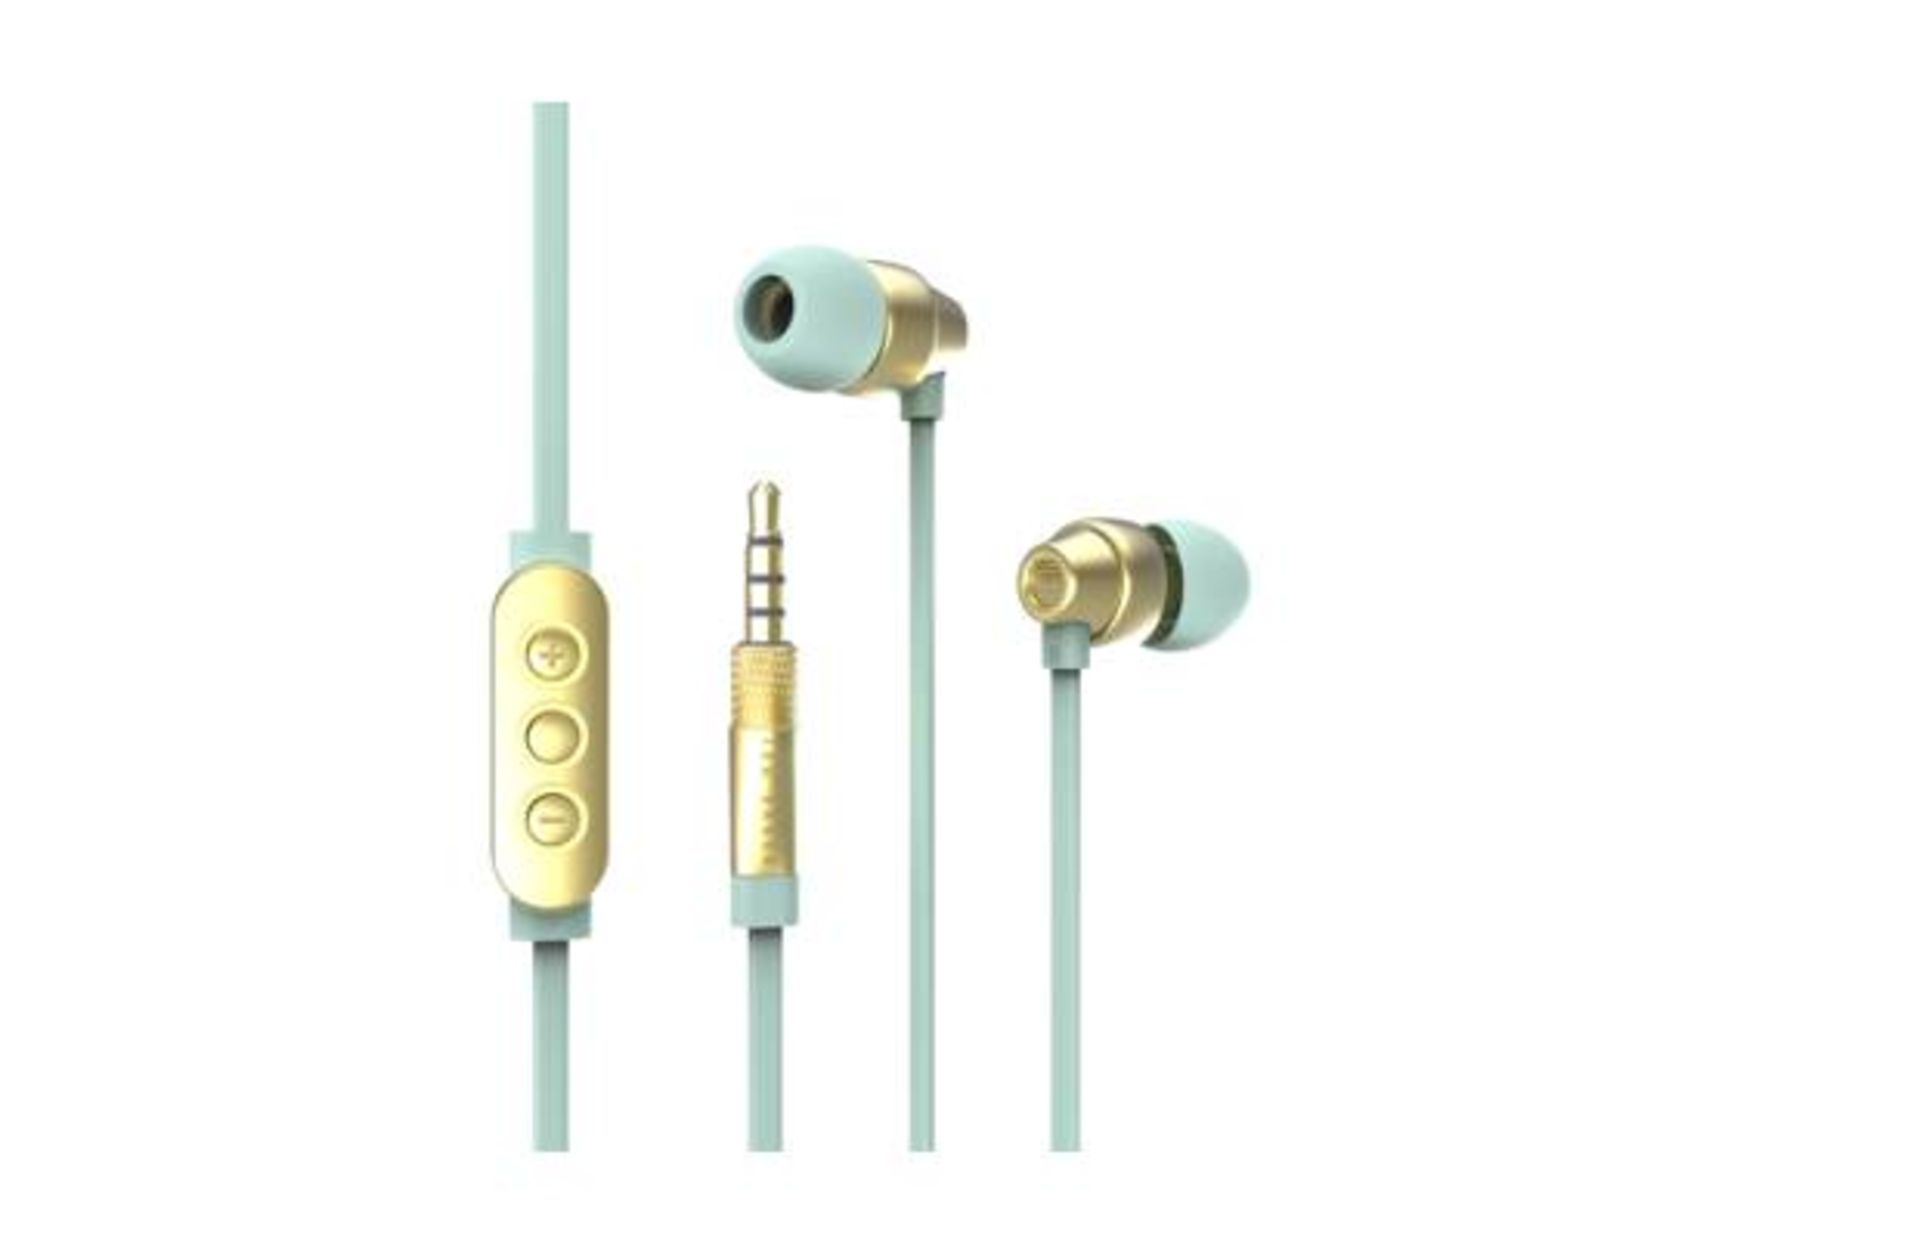 V *TRADE QTY* Brand New Ted Baker Dover In-Ear Headphones In Mint/Gold RRP£59.95 eBay£39.99 X 5 YOUR